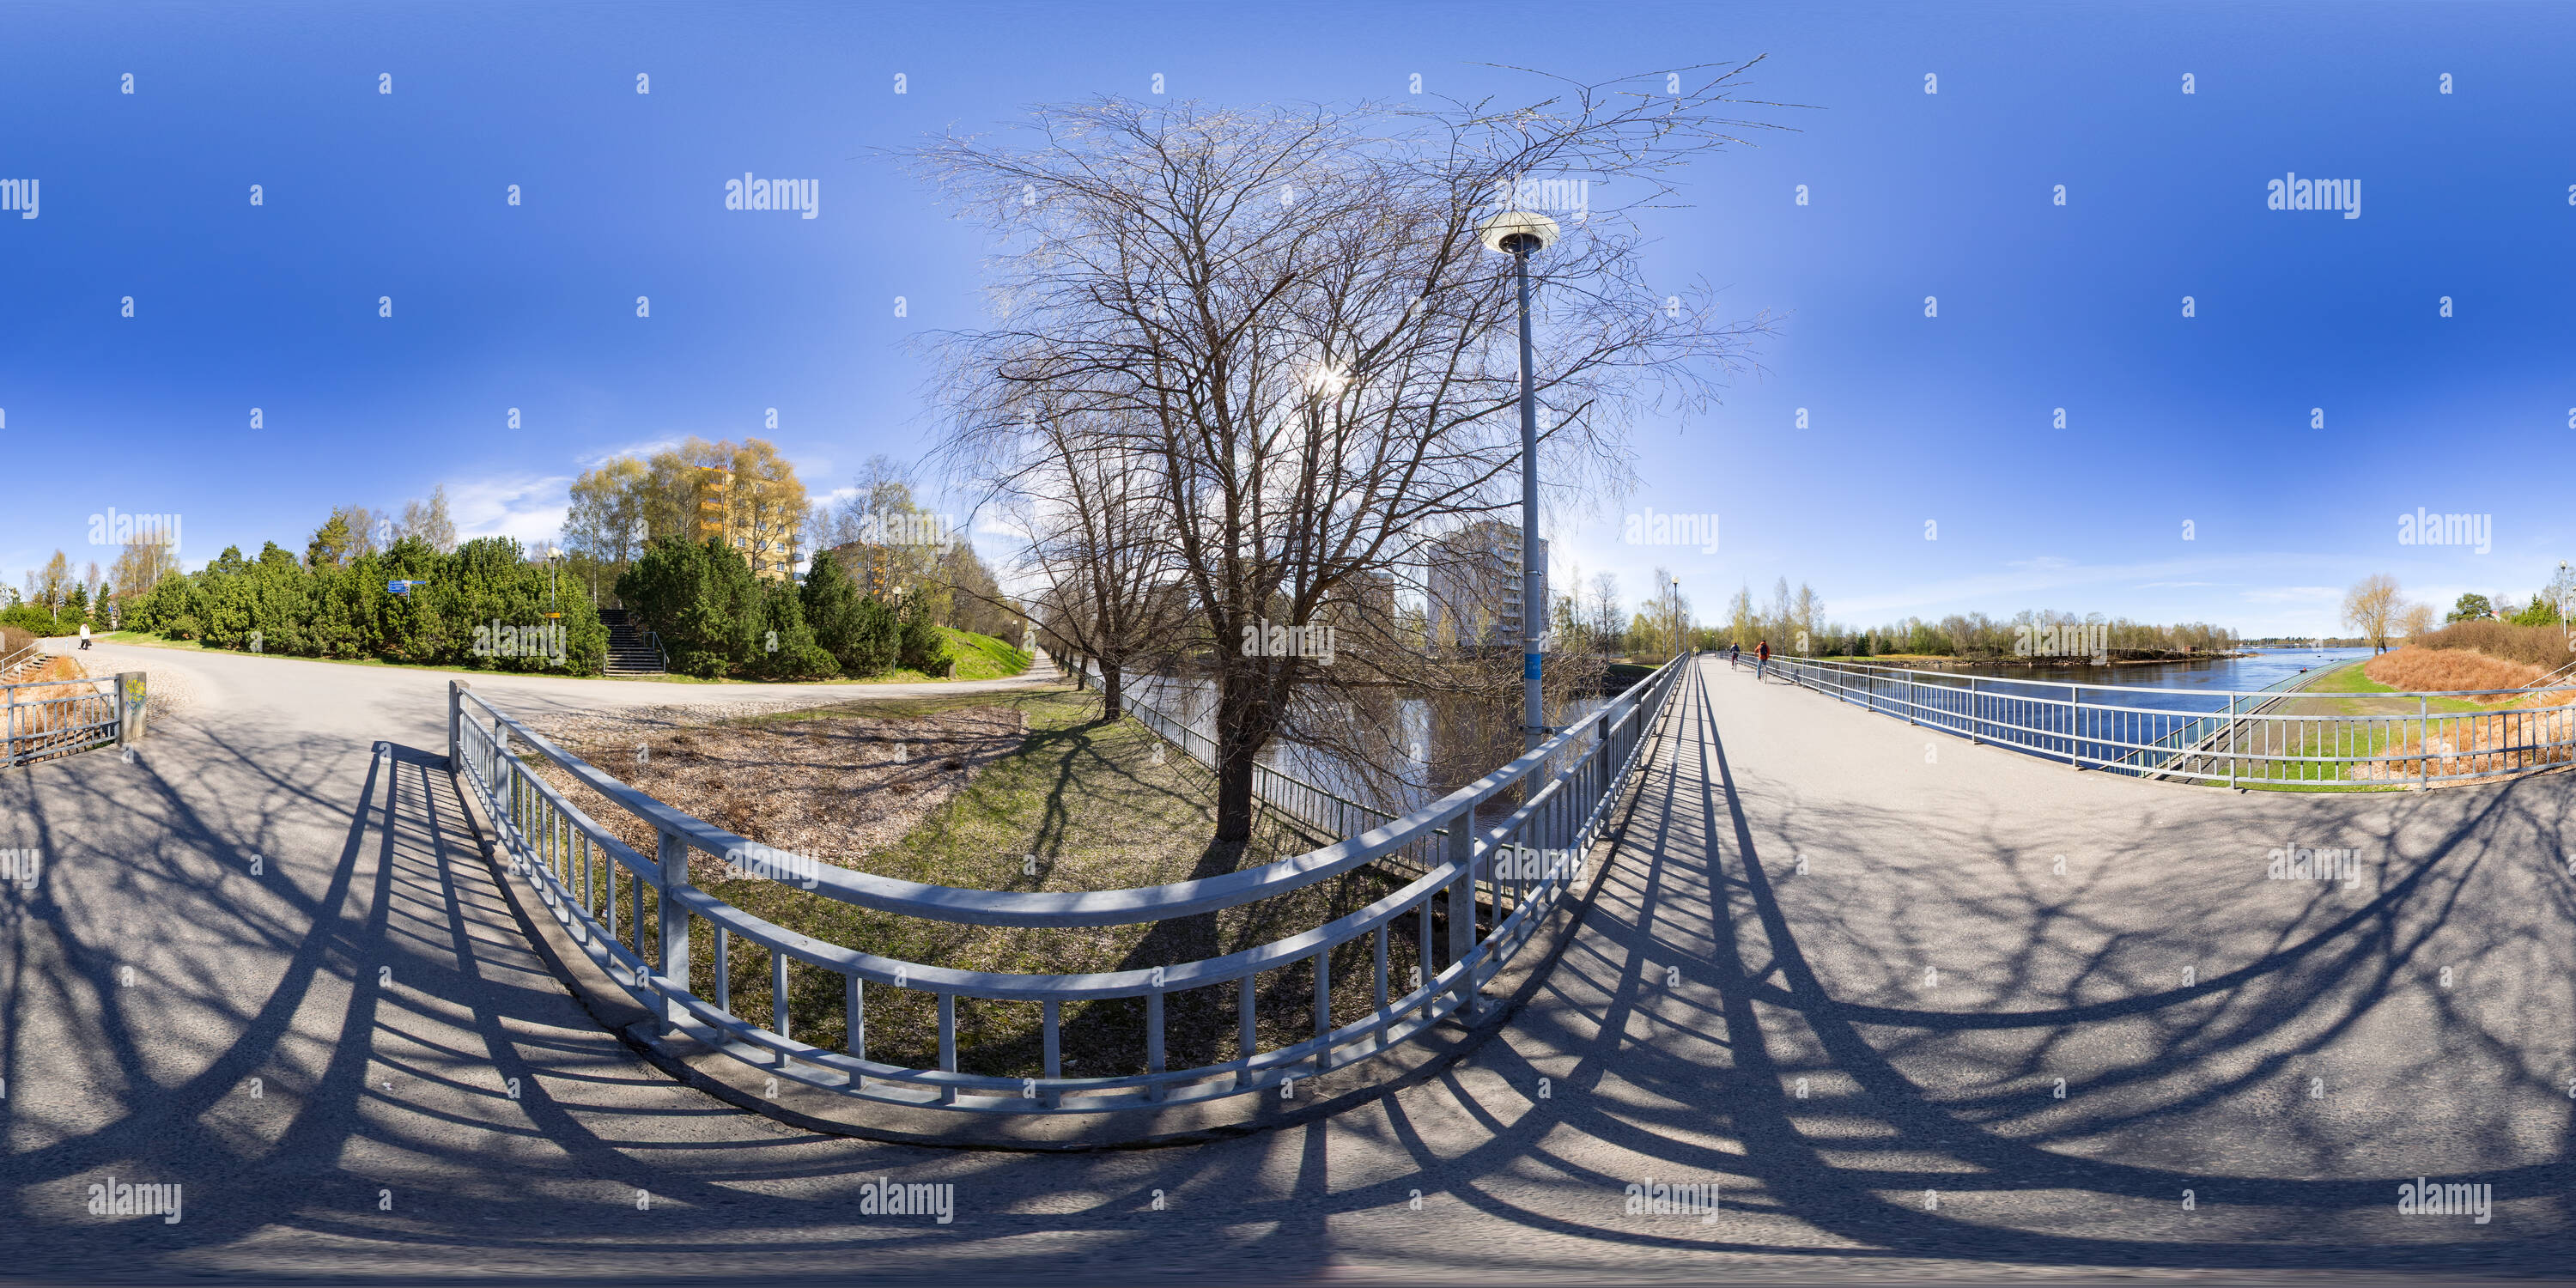 360 degree panoramic view of Pedestrian bridge across a channel in Tuira, Oulu, Finland